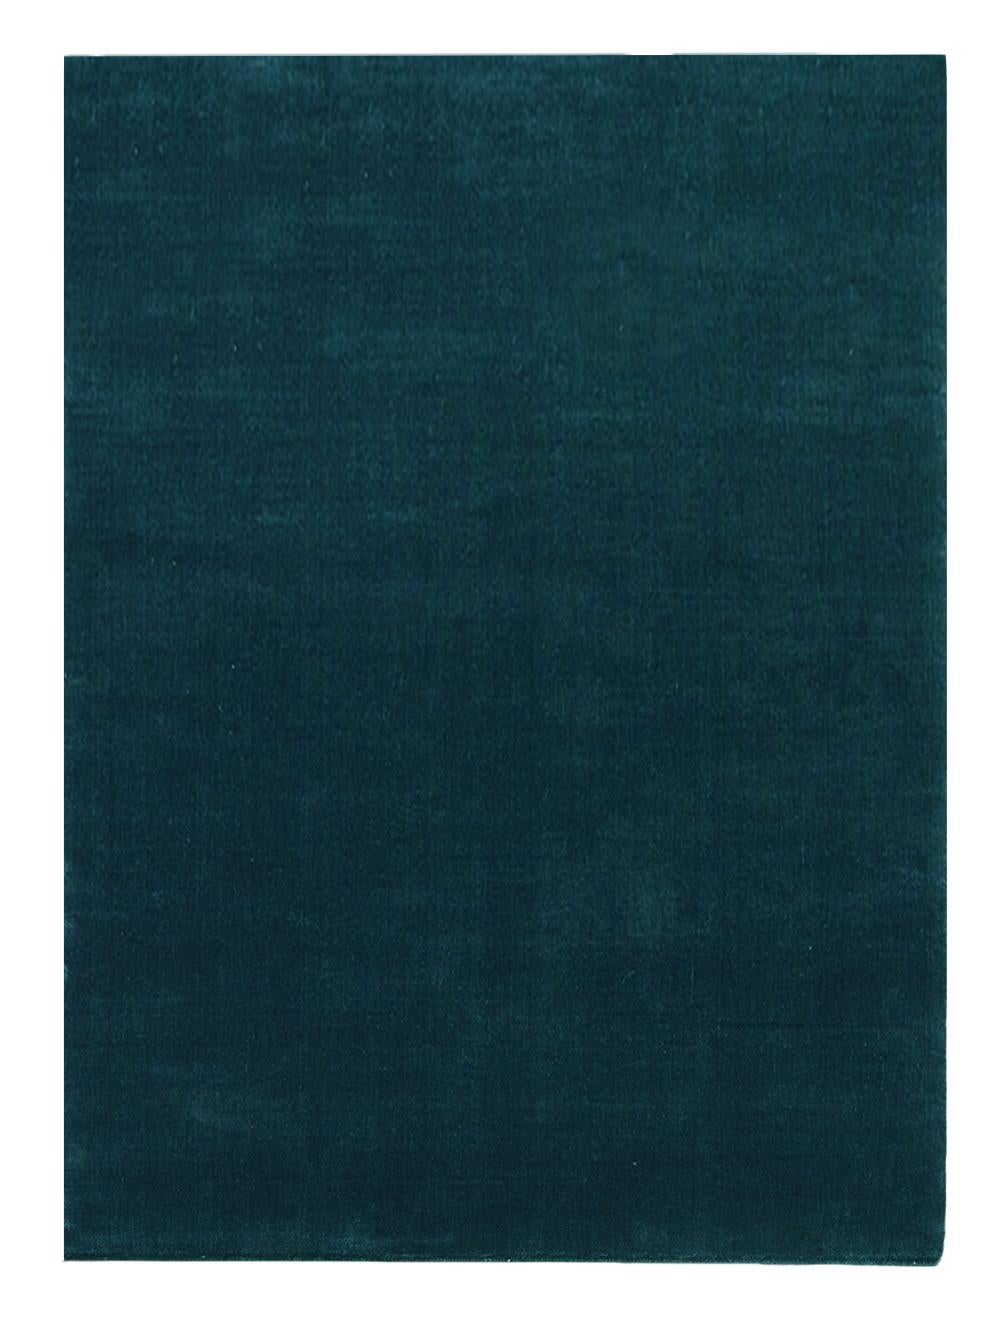 Sea Green Earth Carpet by Massimo Copenhagen.
Handwoven
Materials: 100% New Zealand Wool.
Dimensions: W 300 x H 400 cm.
Available colors: Verte Grey, Moss Green, Blush, Sea Green, and Charcoal.
Other dimensions are available: 140x200 cm,